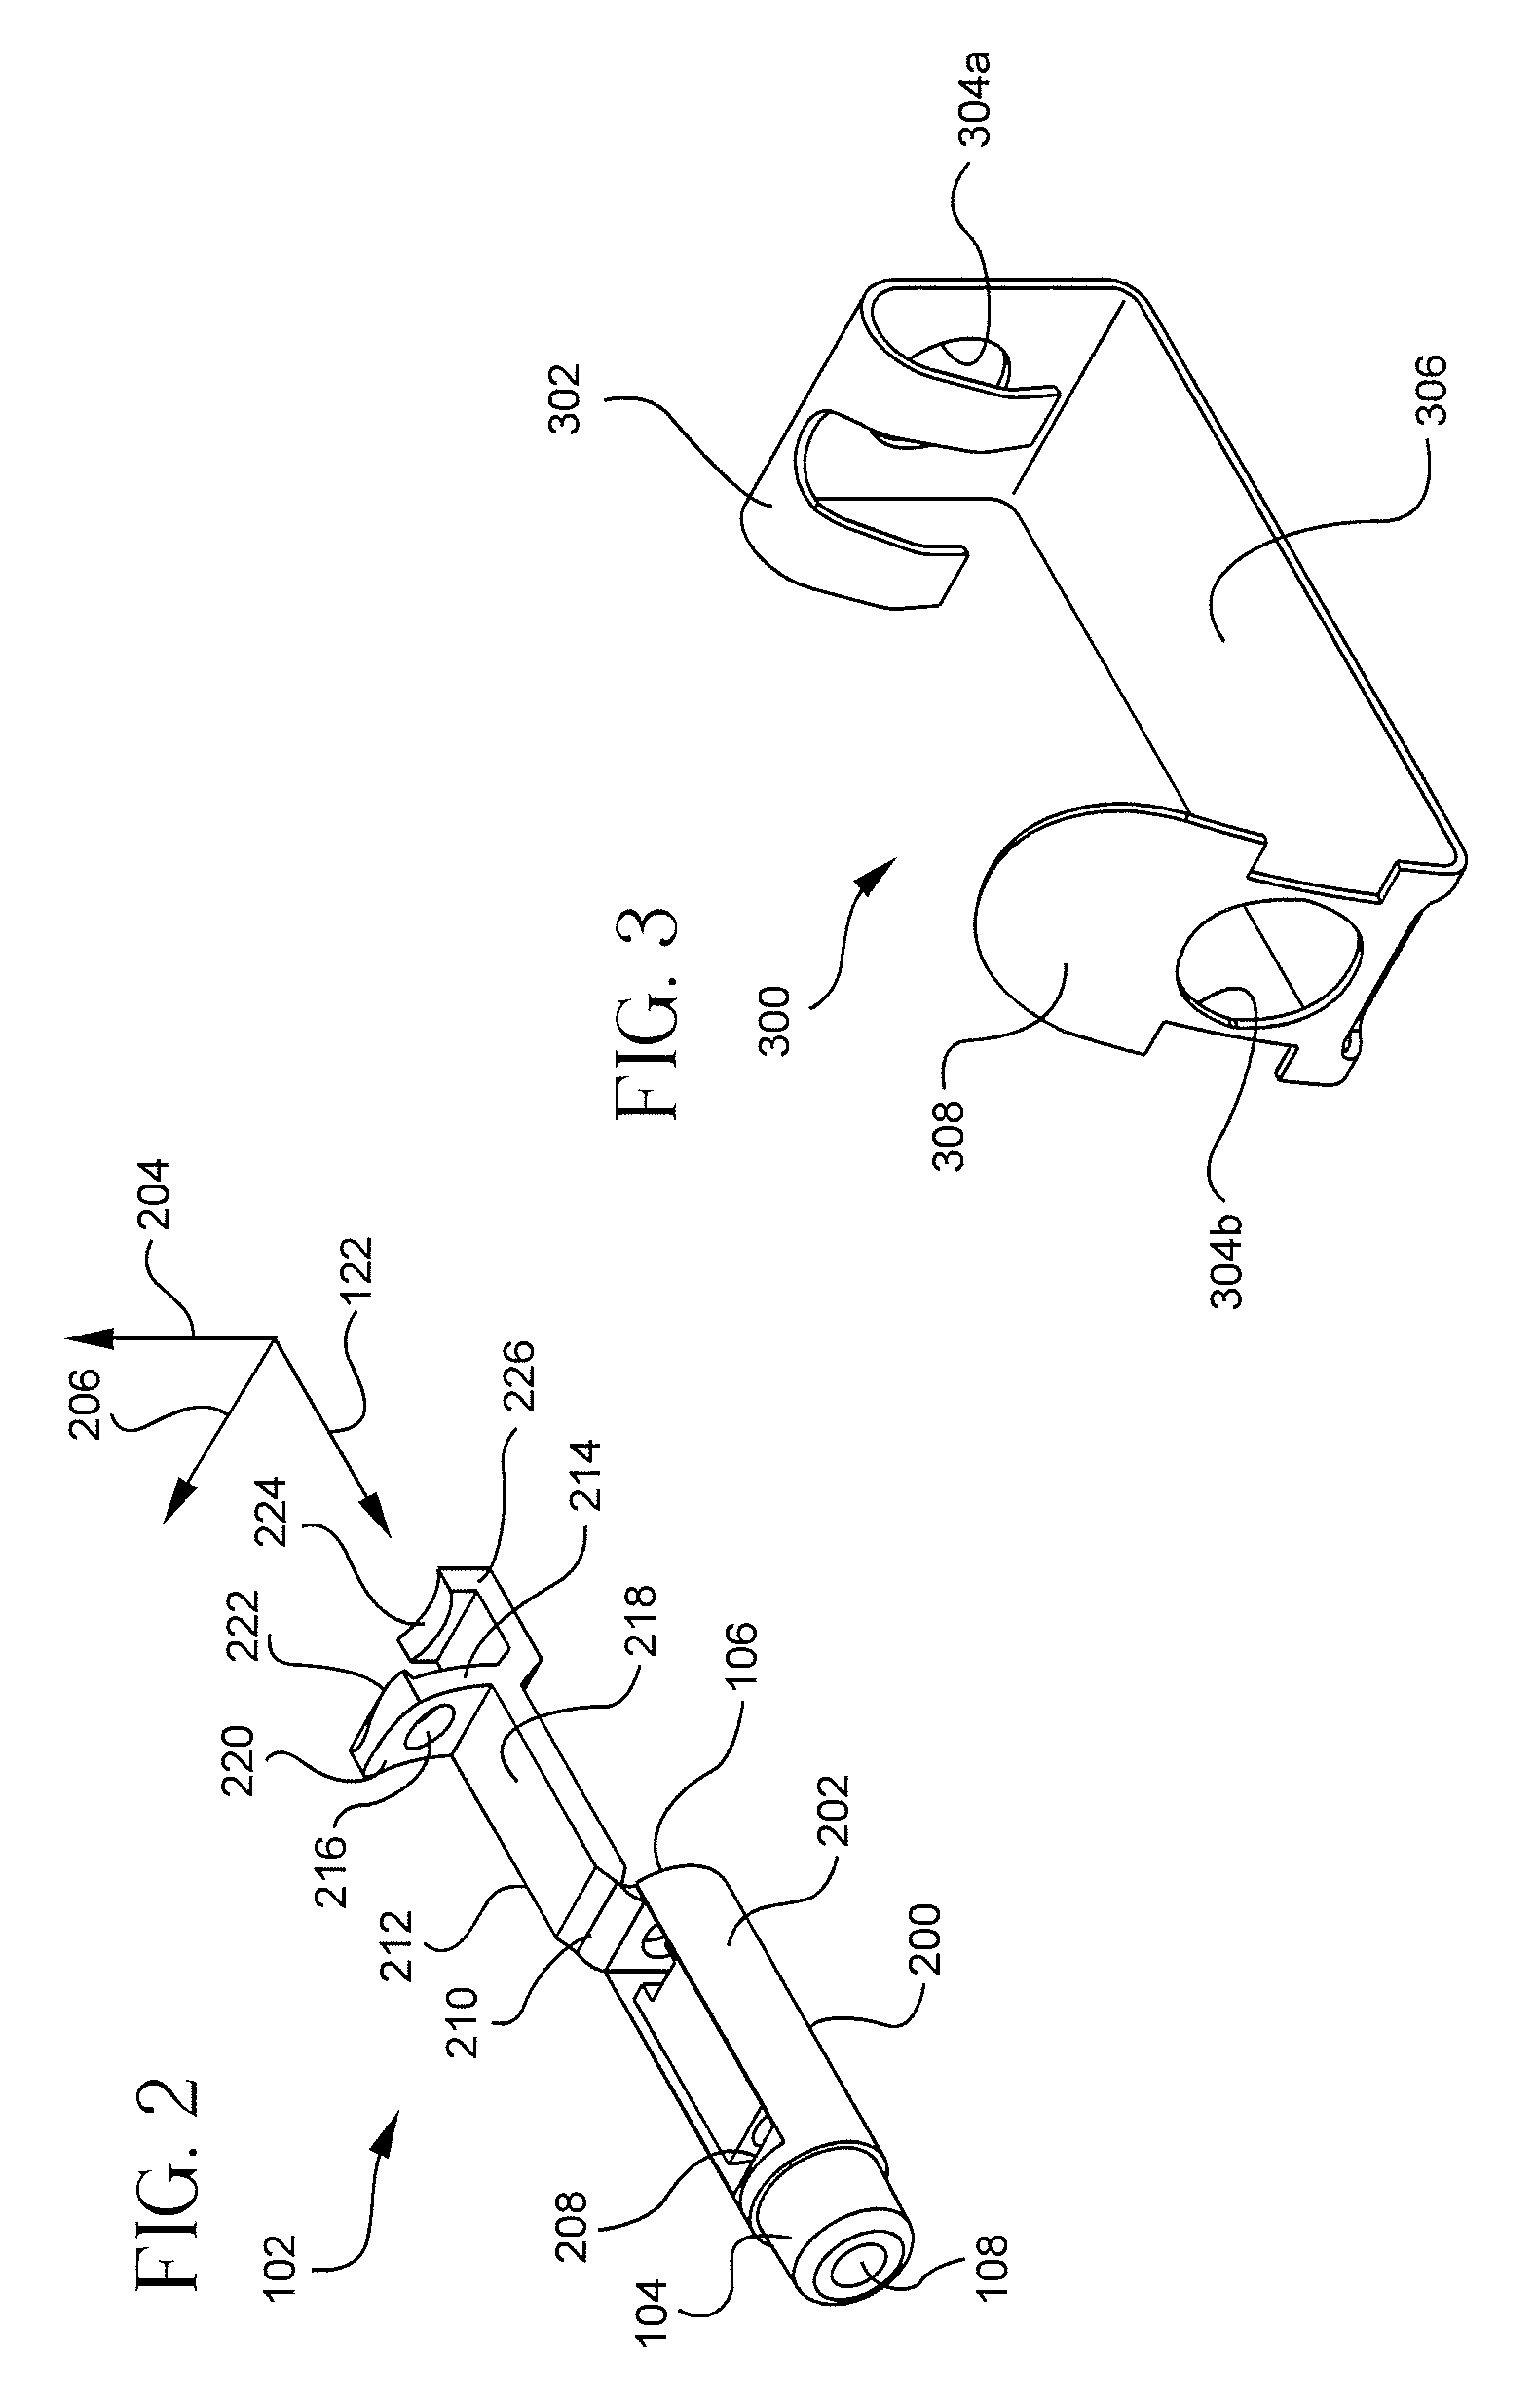 Catheter insertion device with automatic safety barrier